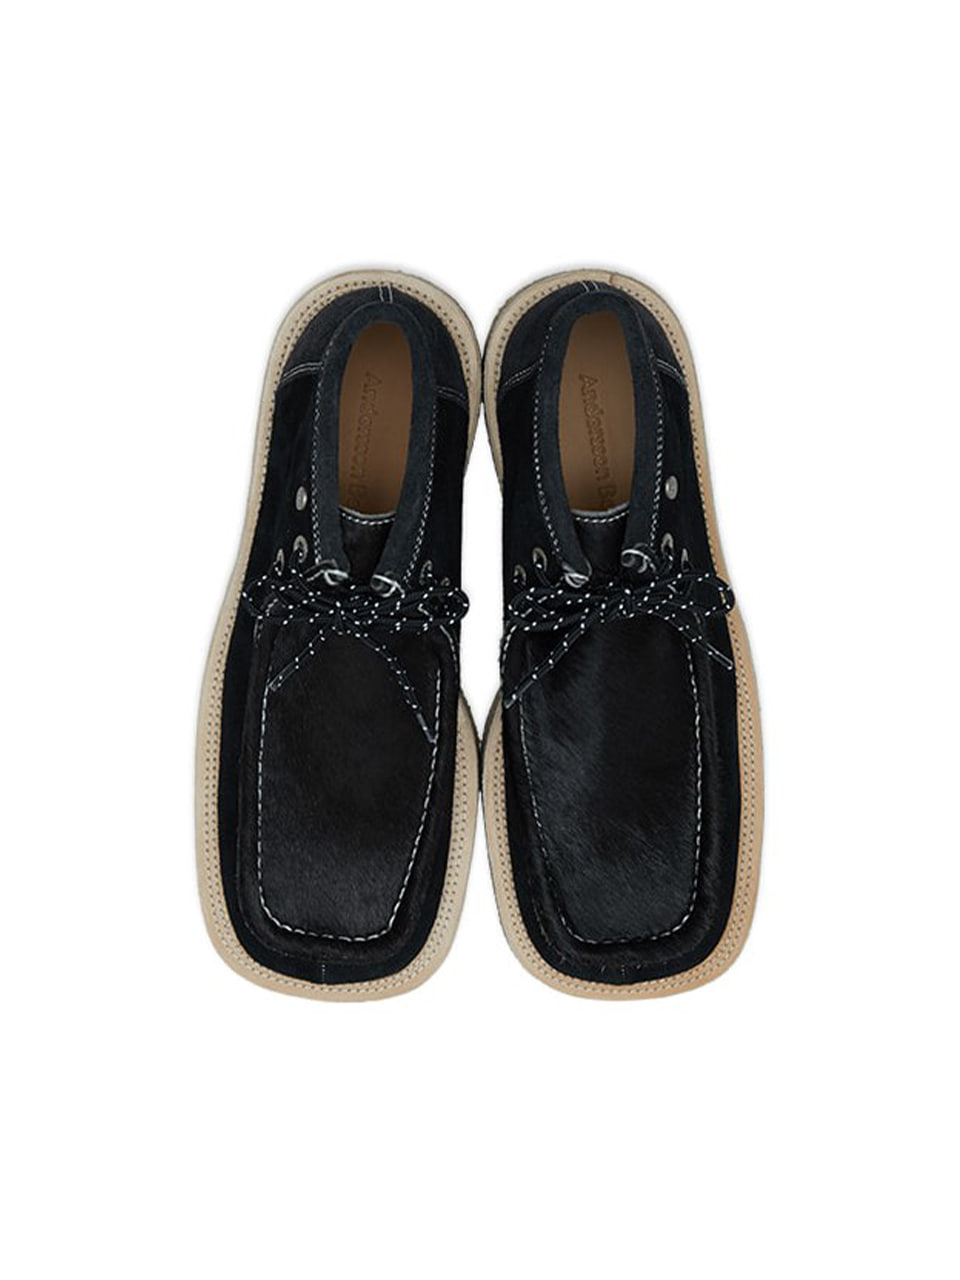 ANDERSSON BELL - CREDOSE DESERT BOOTS (BLACK)